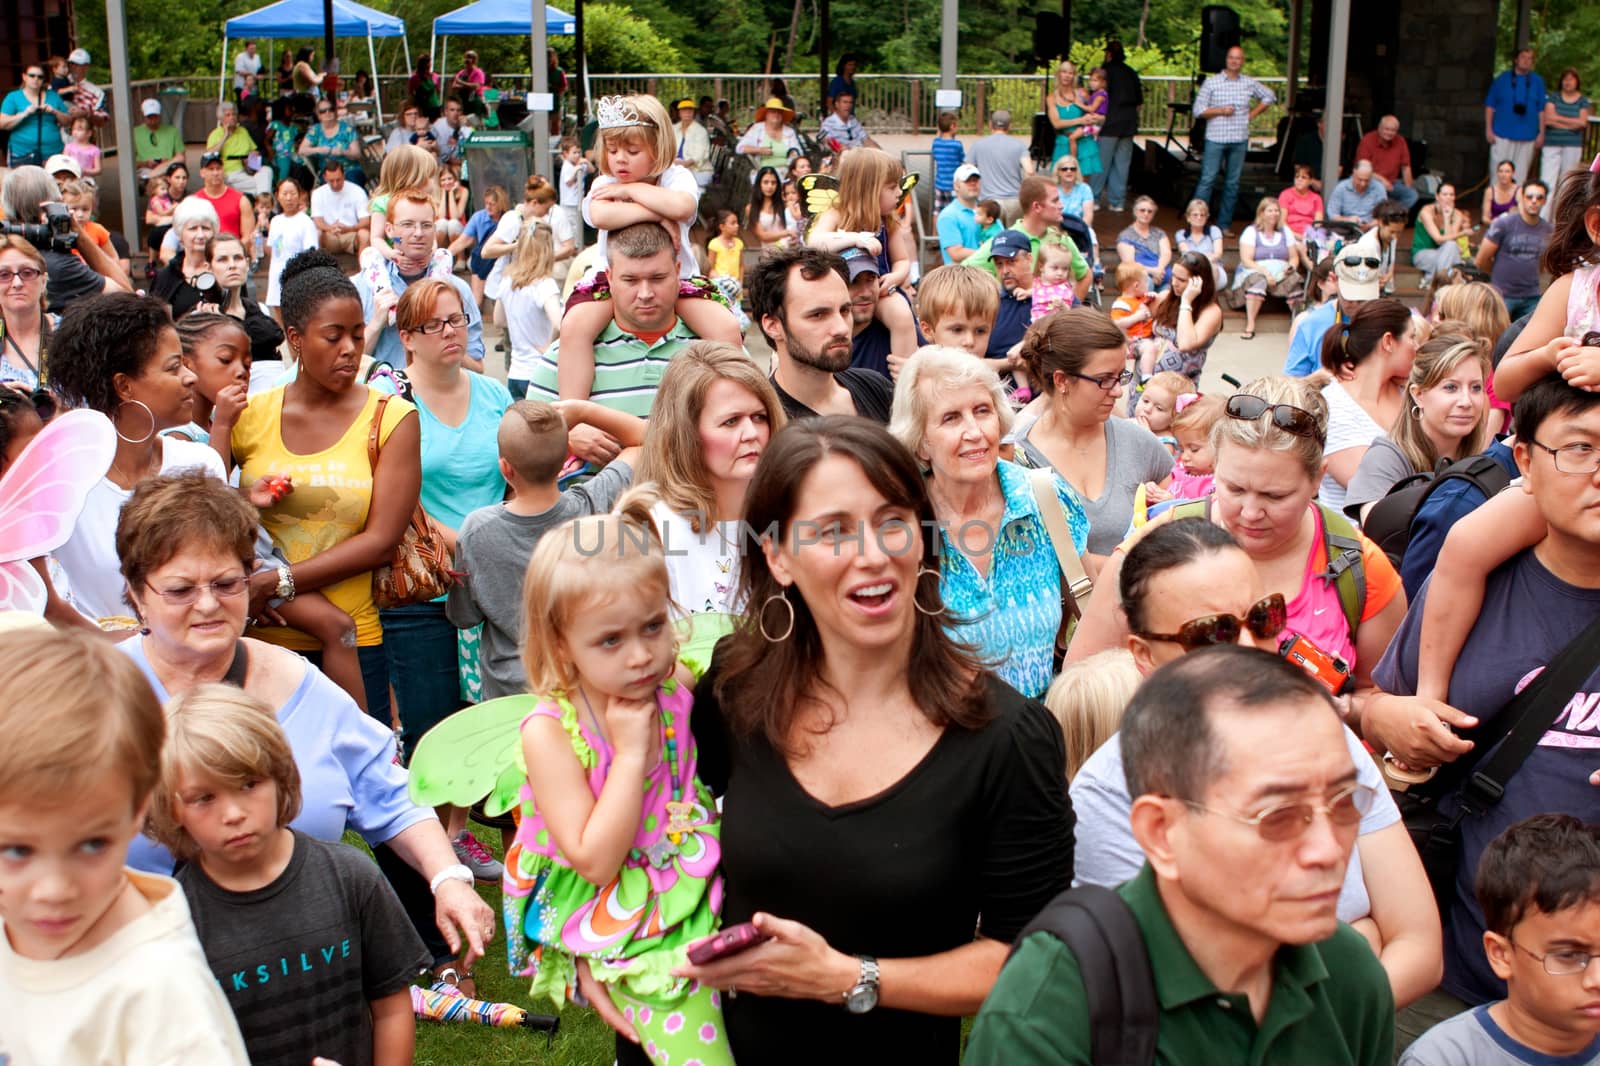 Crowd Gathers To View Release of Butterflies At Summer Festival by BluIz60